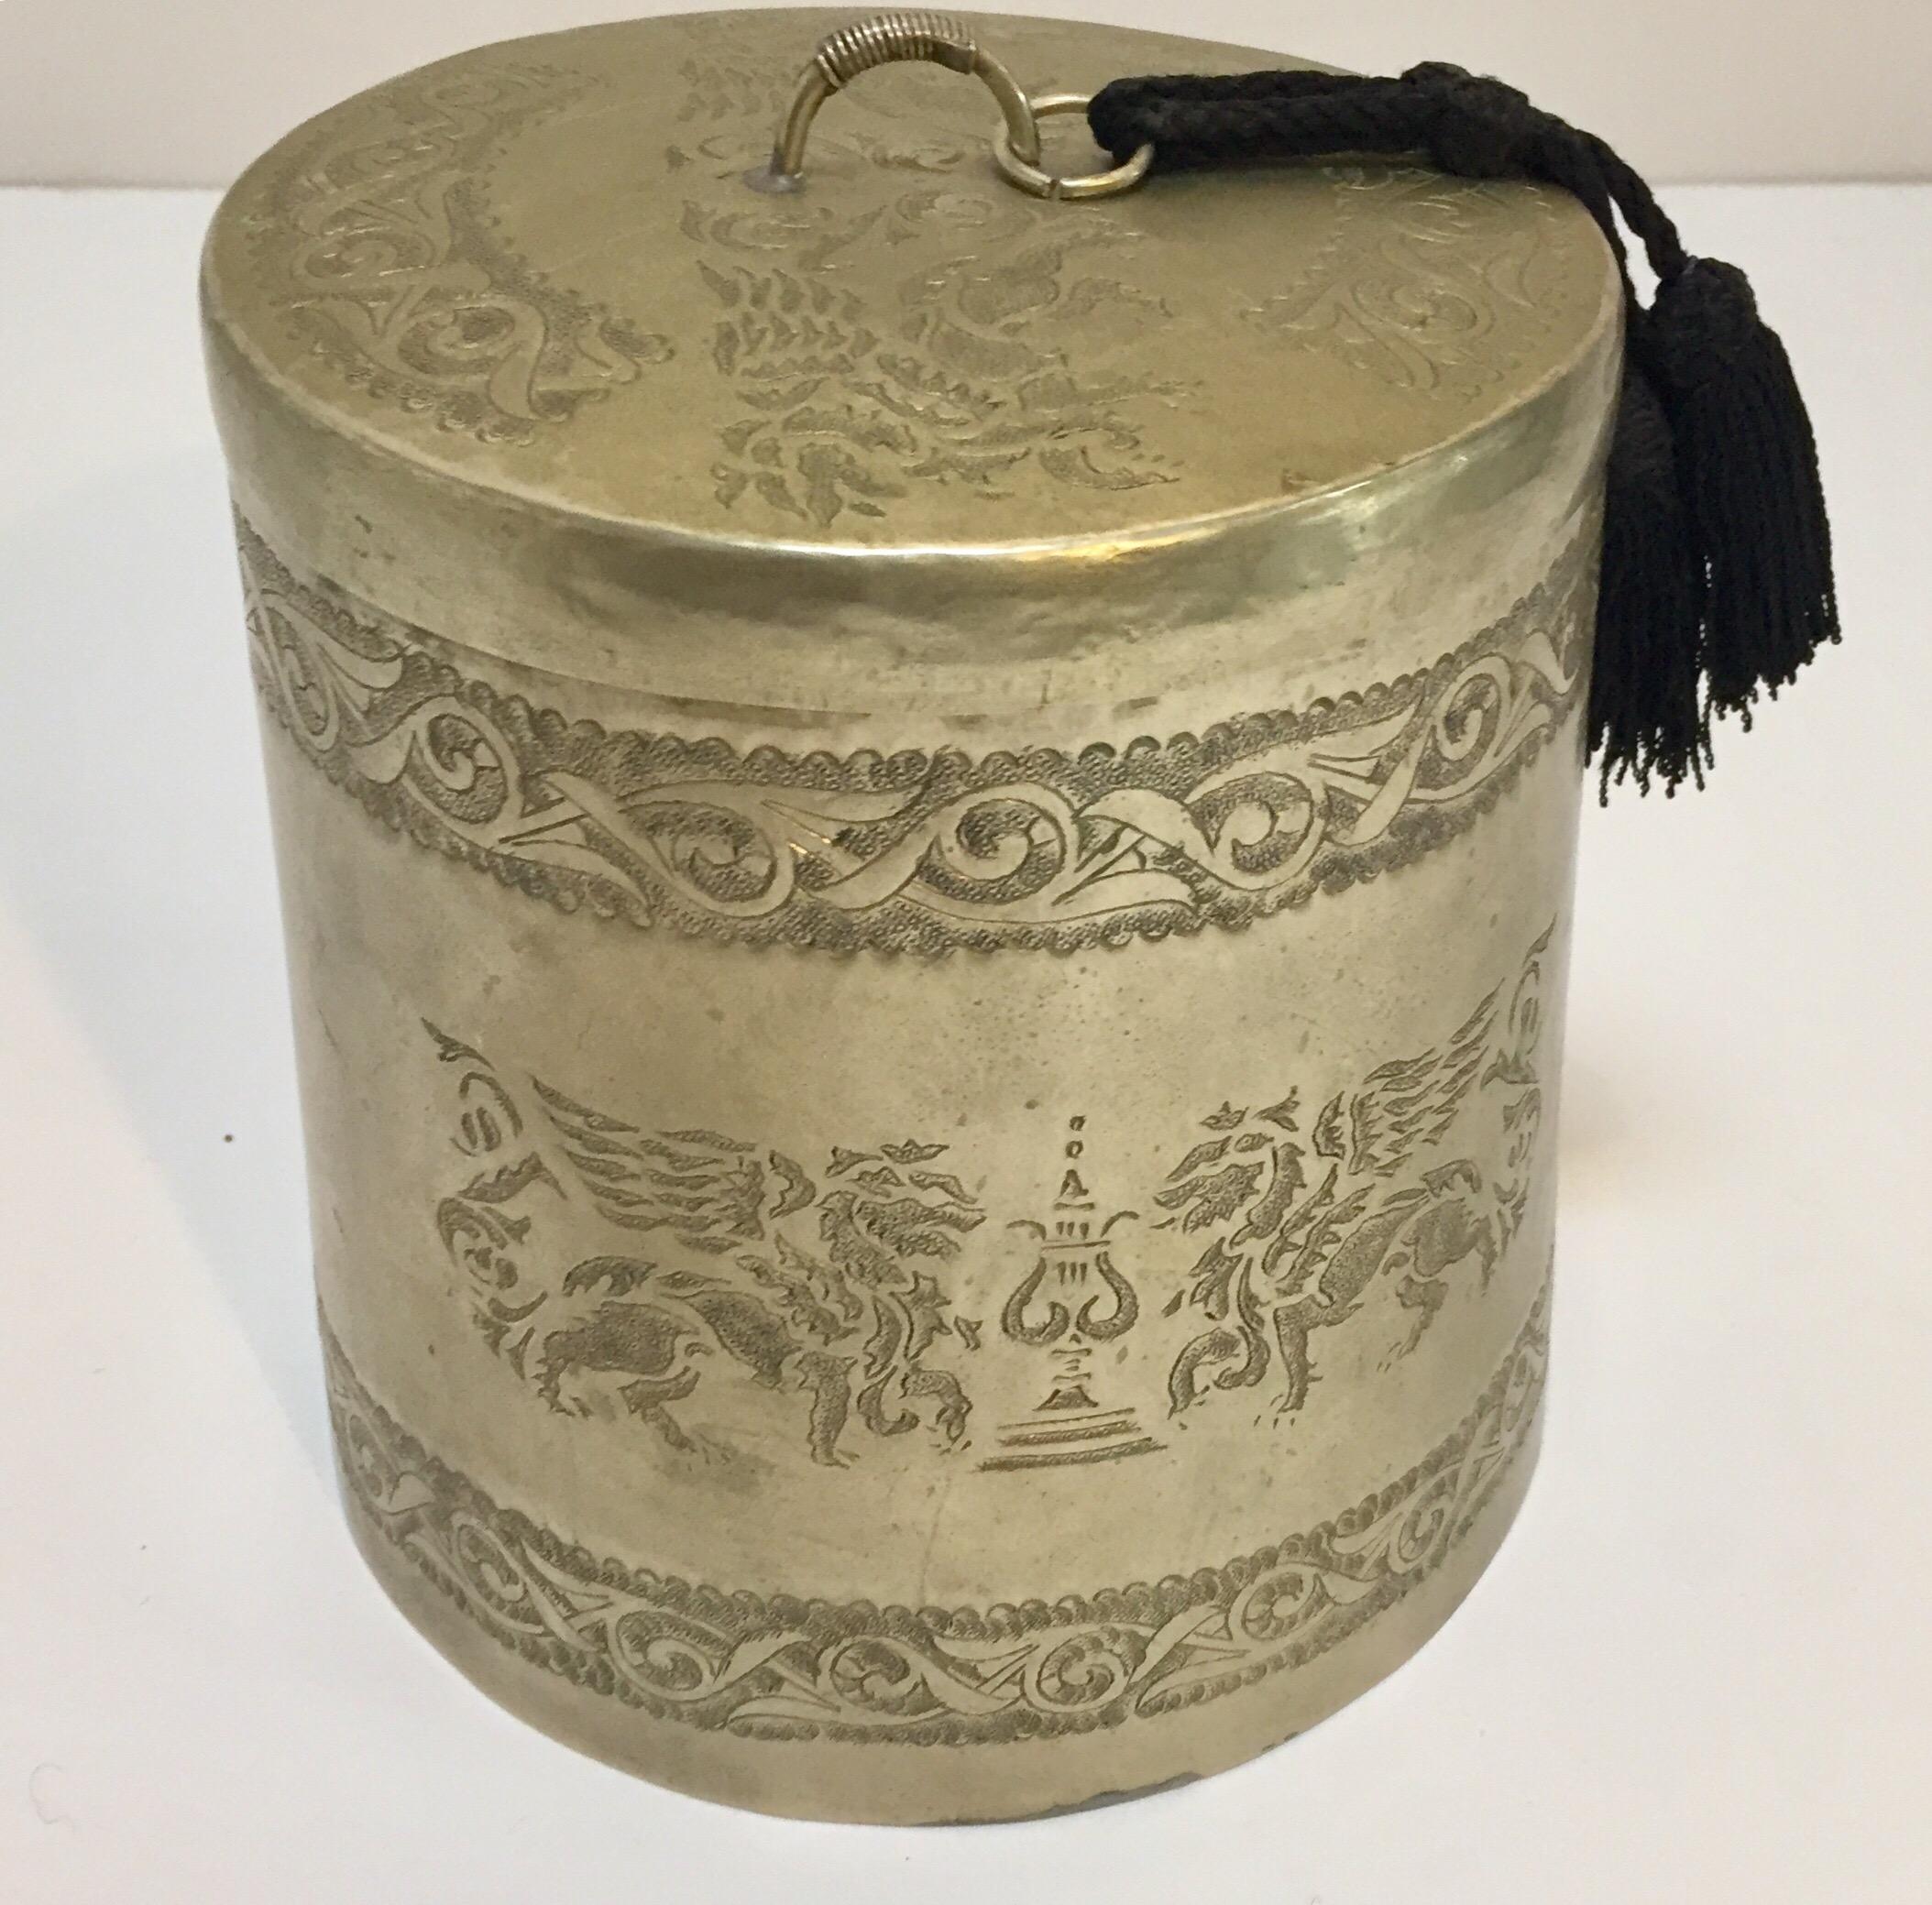 Beautiful metal hand-hammered Turkish box with lid.
The box has the form of the Turkish traditional hat with tassels.
Probably used as a tea caddy box.
Nice patina.